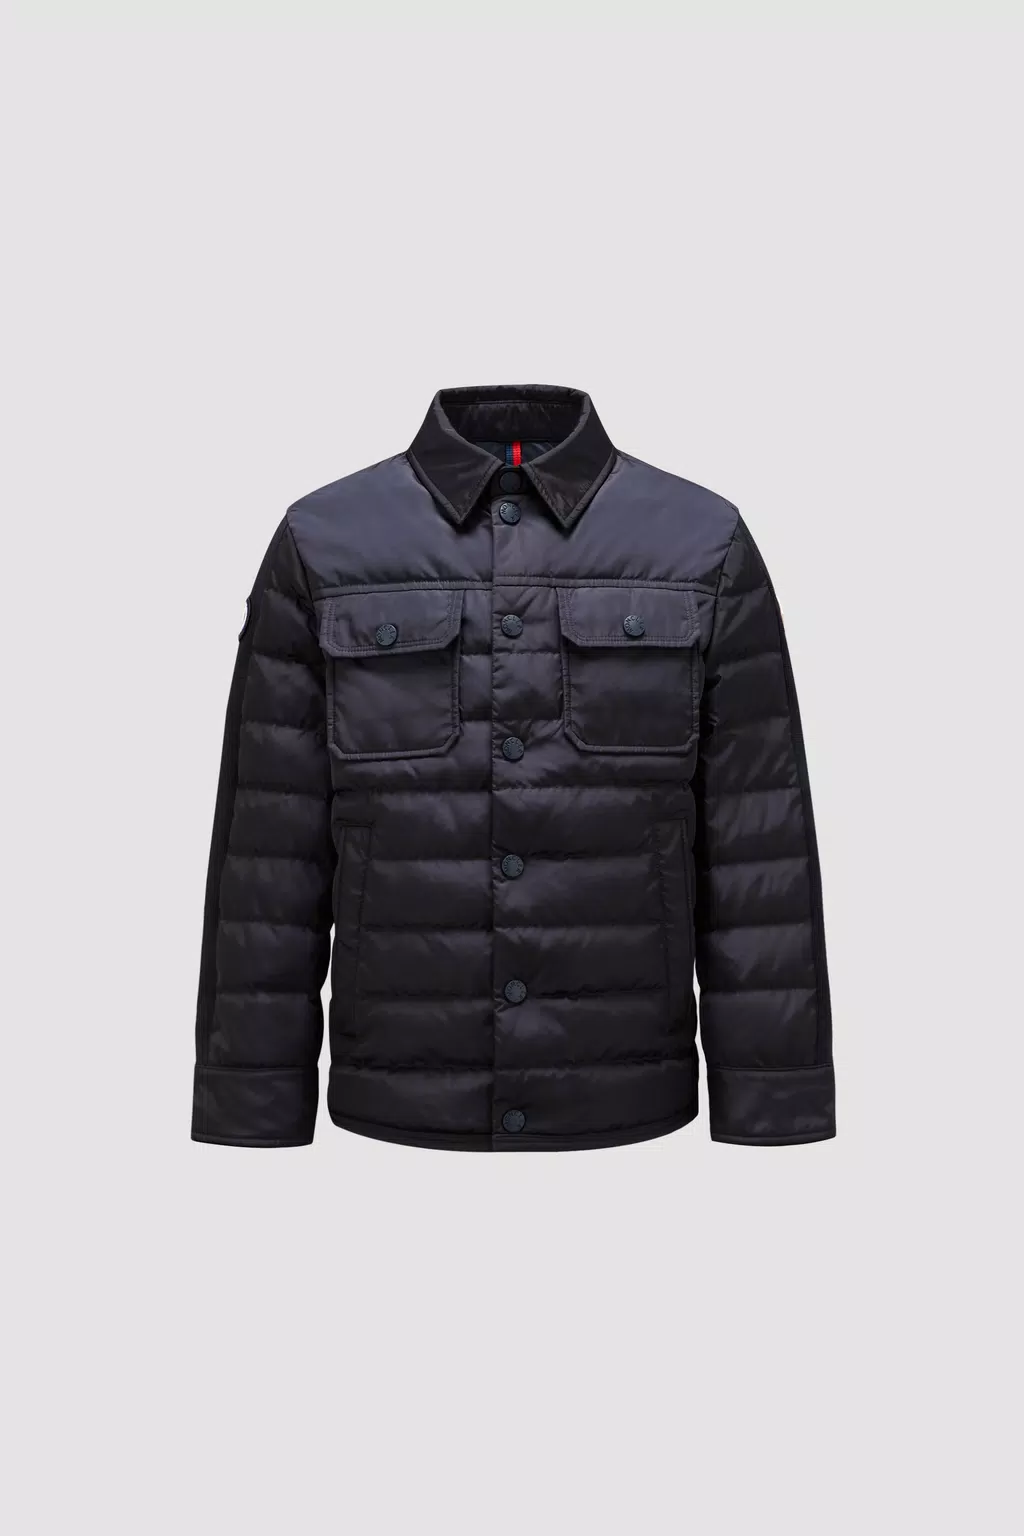 Down Puffer Jackets, Coats & Kids' Vests for Boys